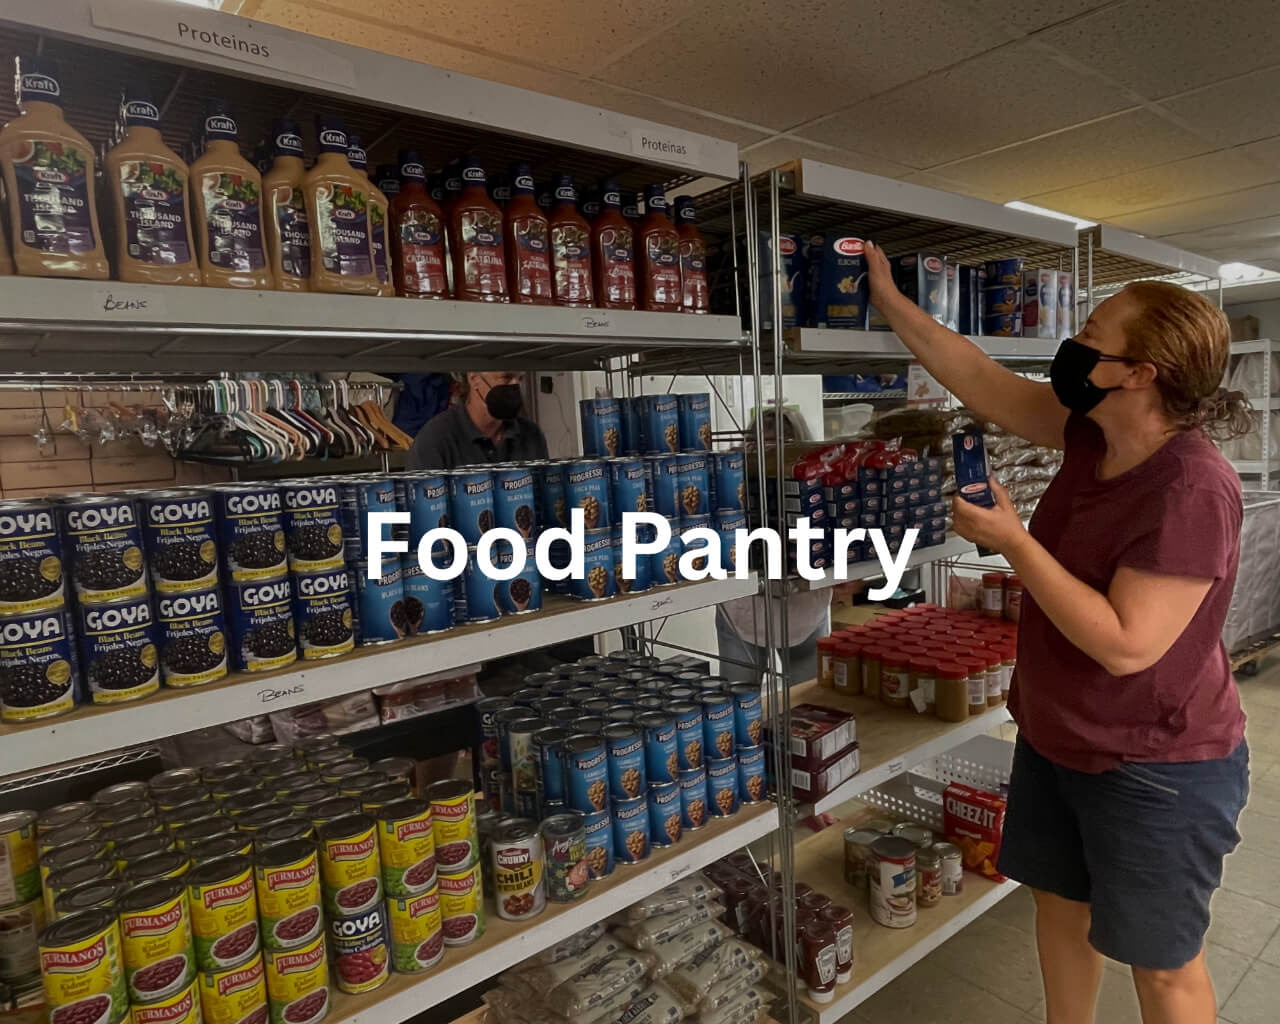 Food pantry poster, a man working at a place